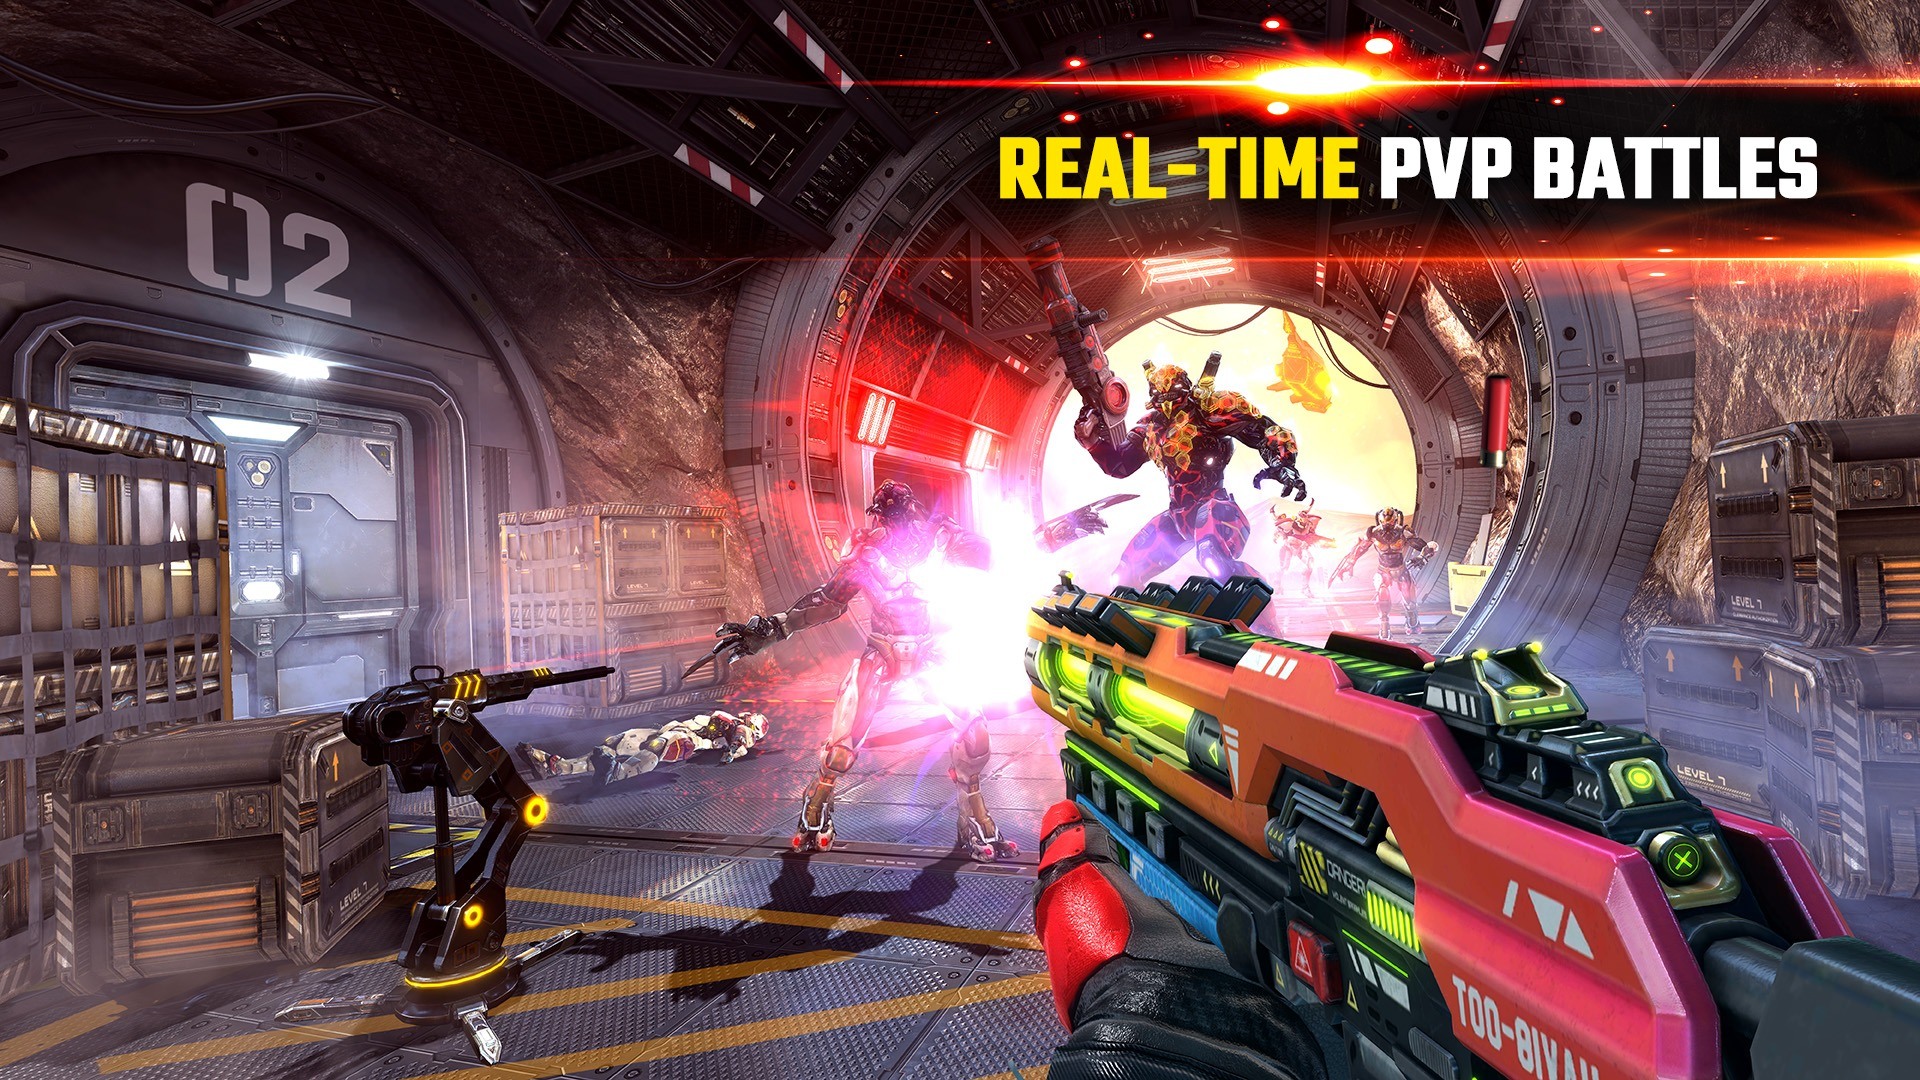 10 best gun games for Android: competitive, storytelling, battle